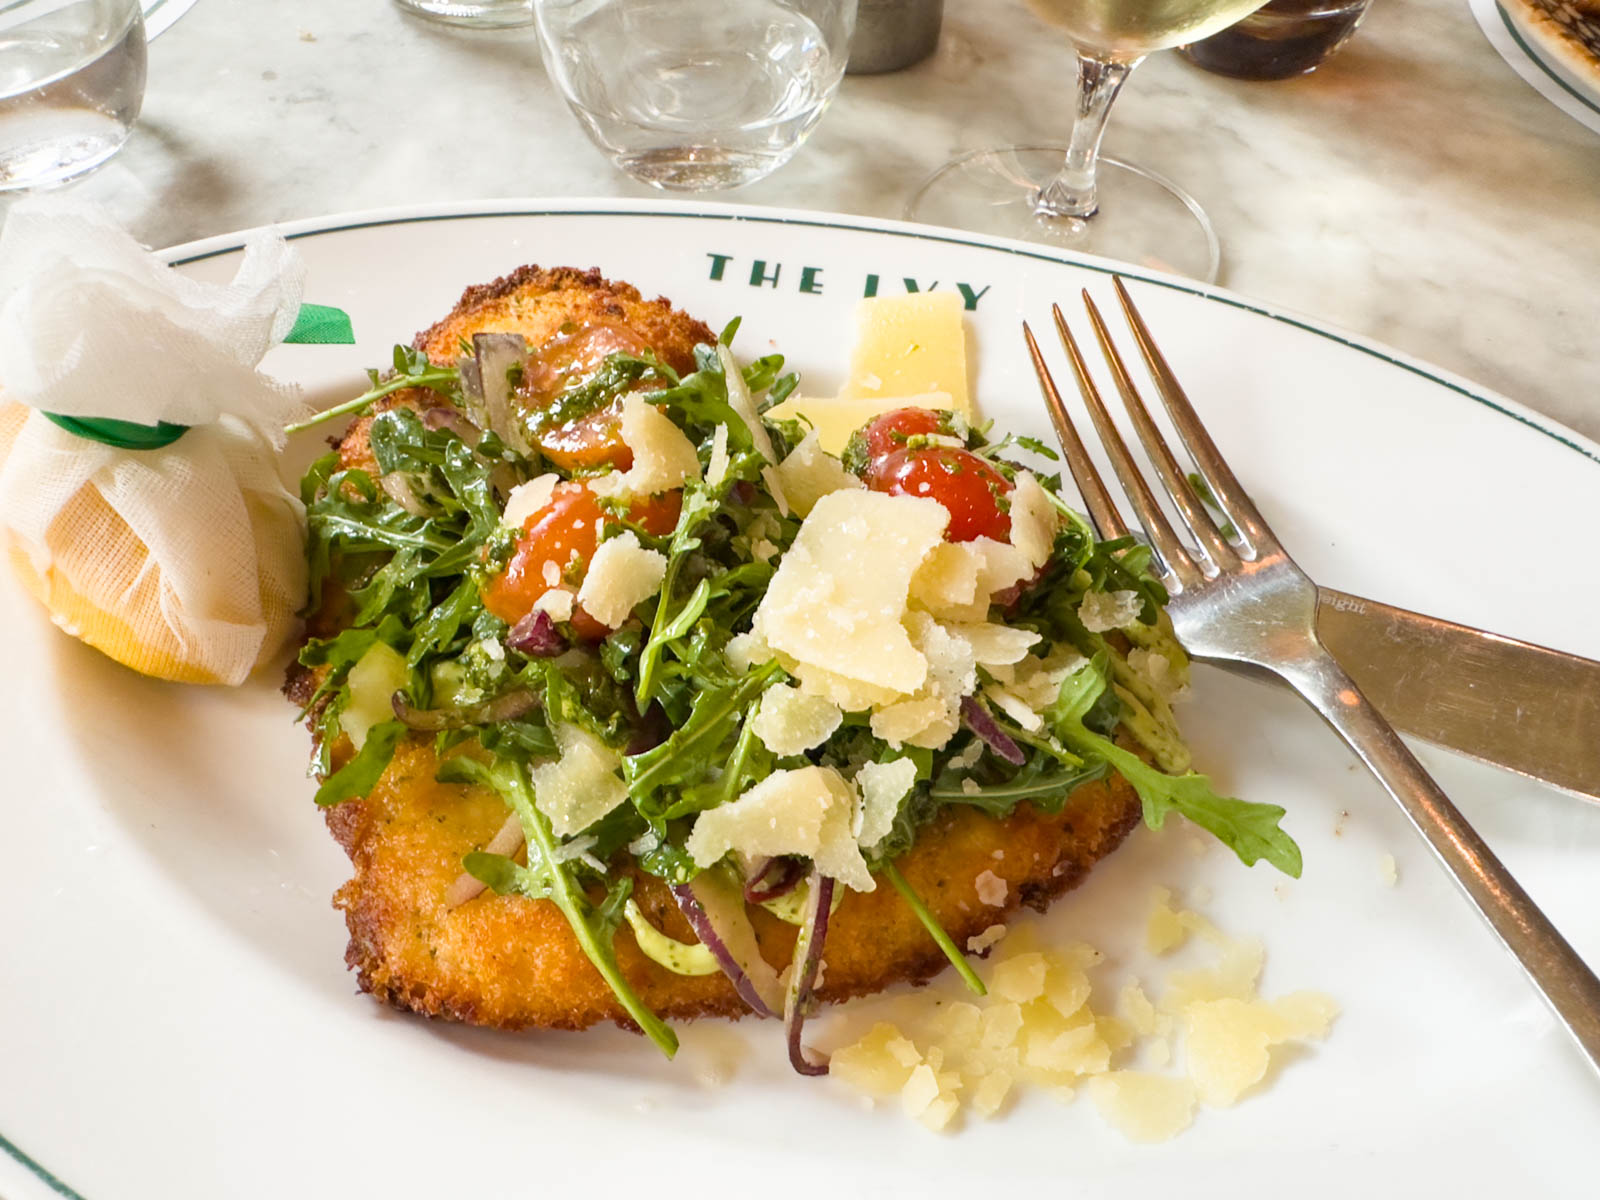 A breaded chicken cutlet is topped with rocket, parmesan, and tomatoes.